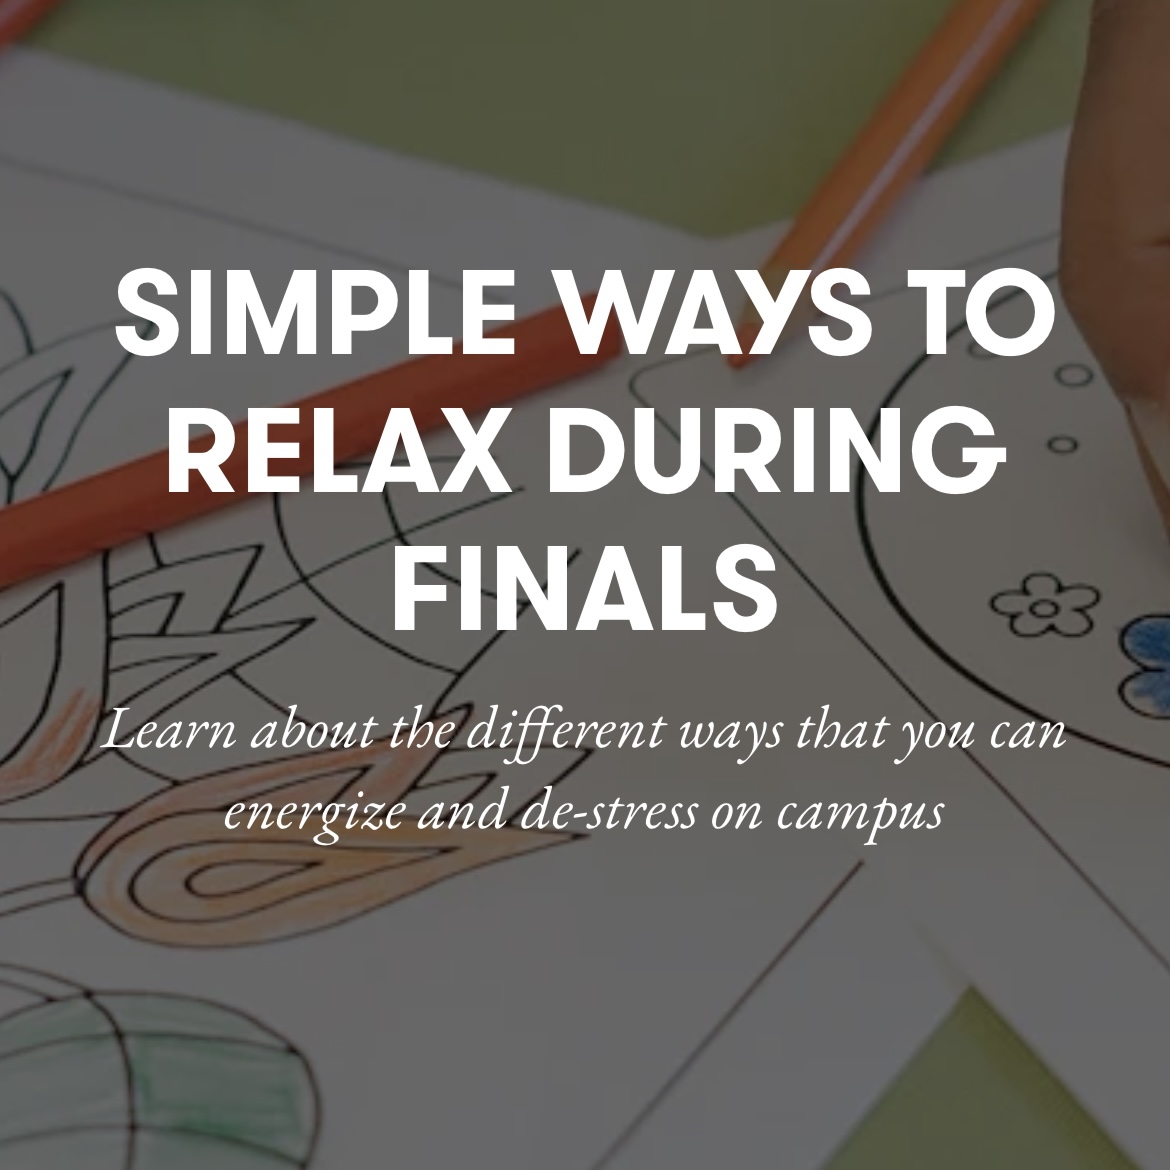 close up image of coloring sheets with colored pencils on them, with the text "simple ways to relax during finals"